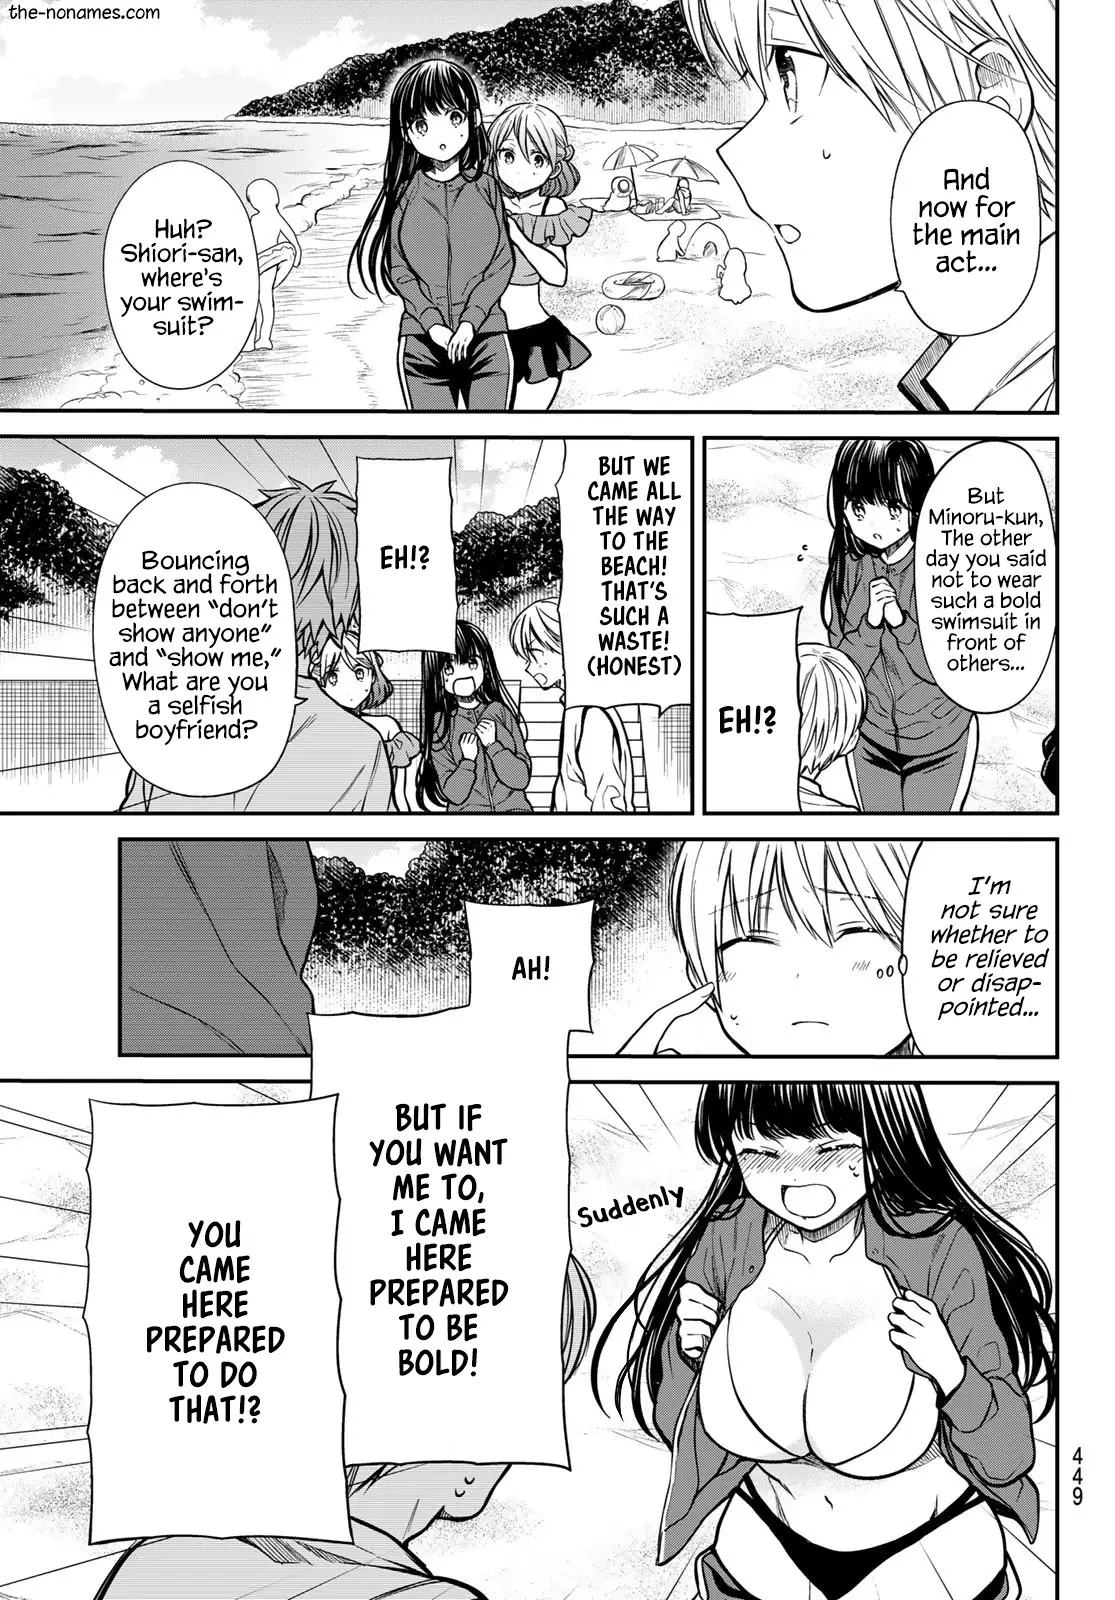 The Story Of An Onee-San Who Wants To Keep A High School Boy - 236 page 4